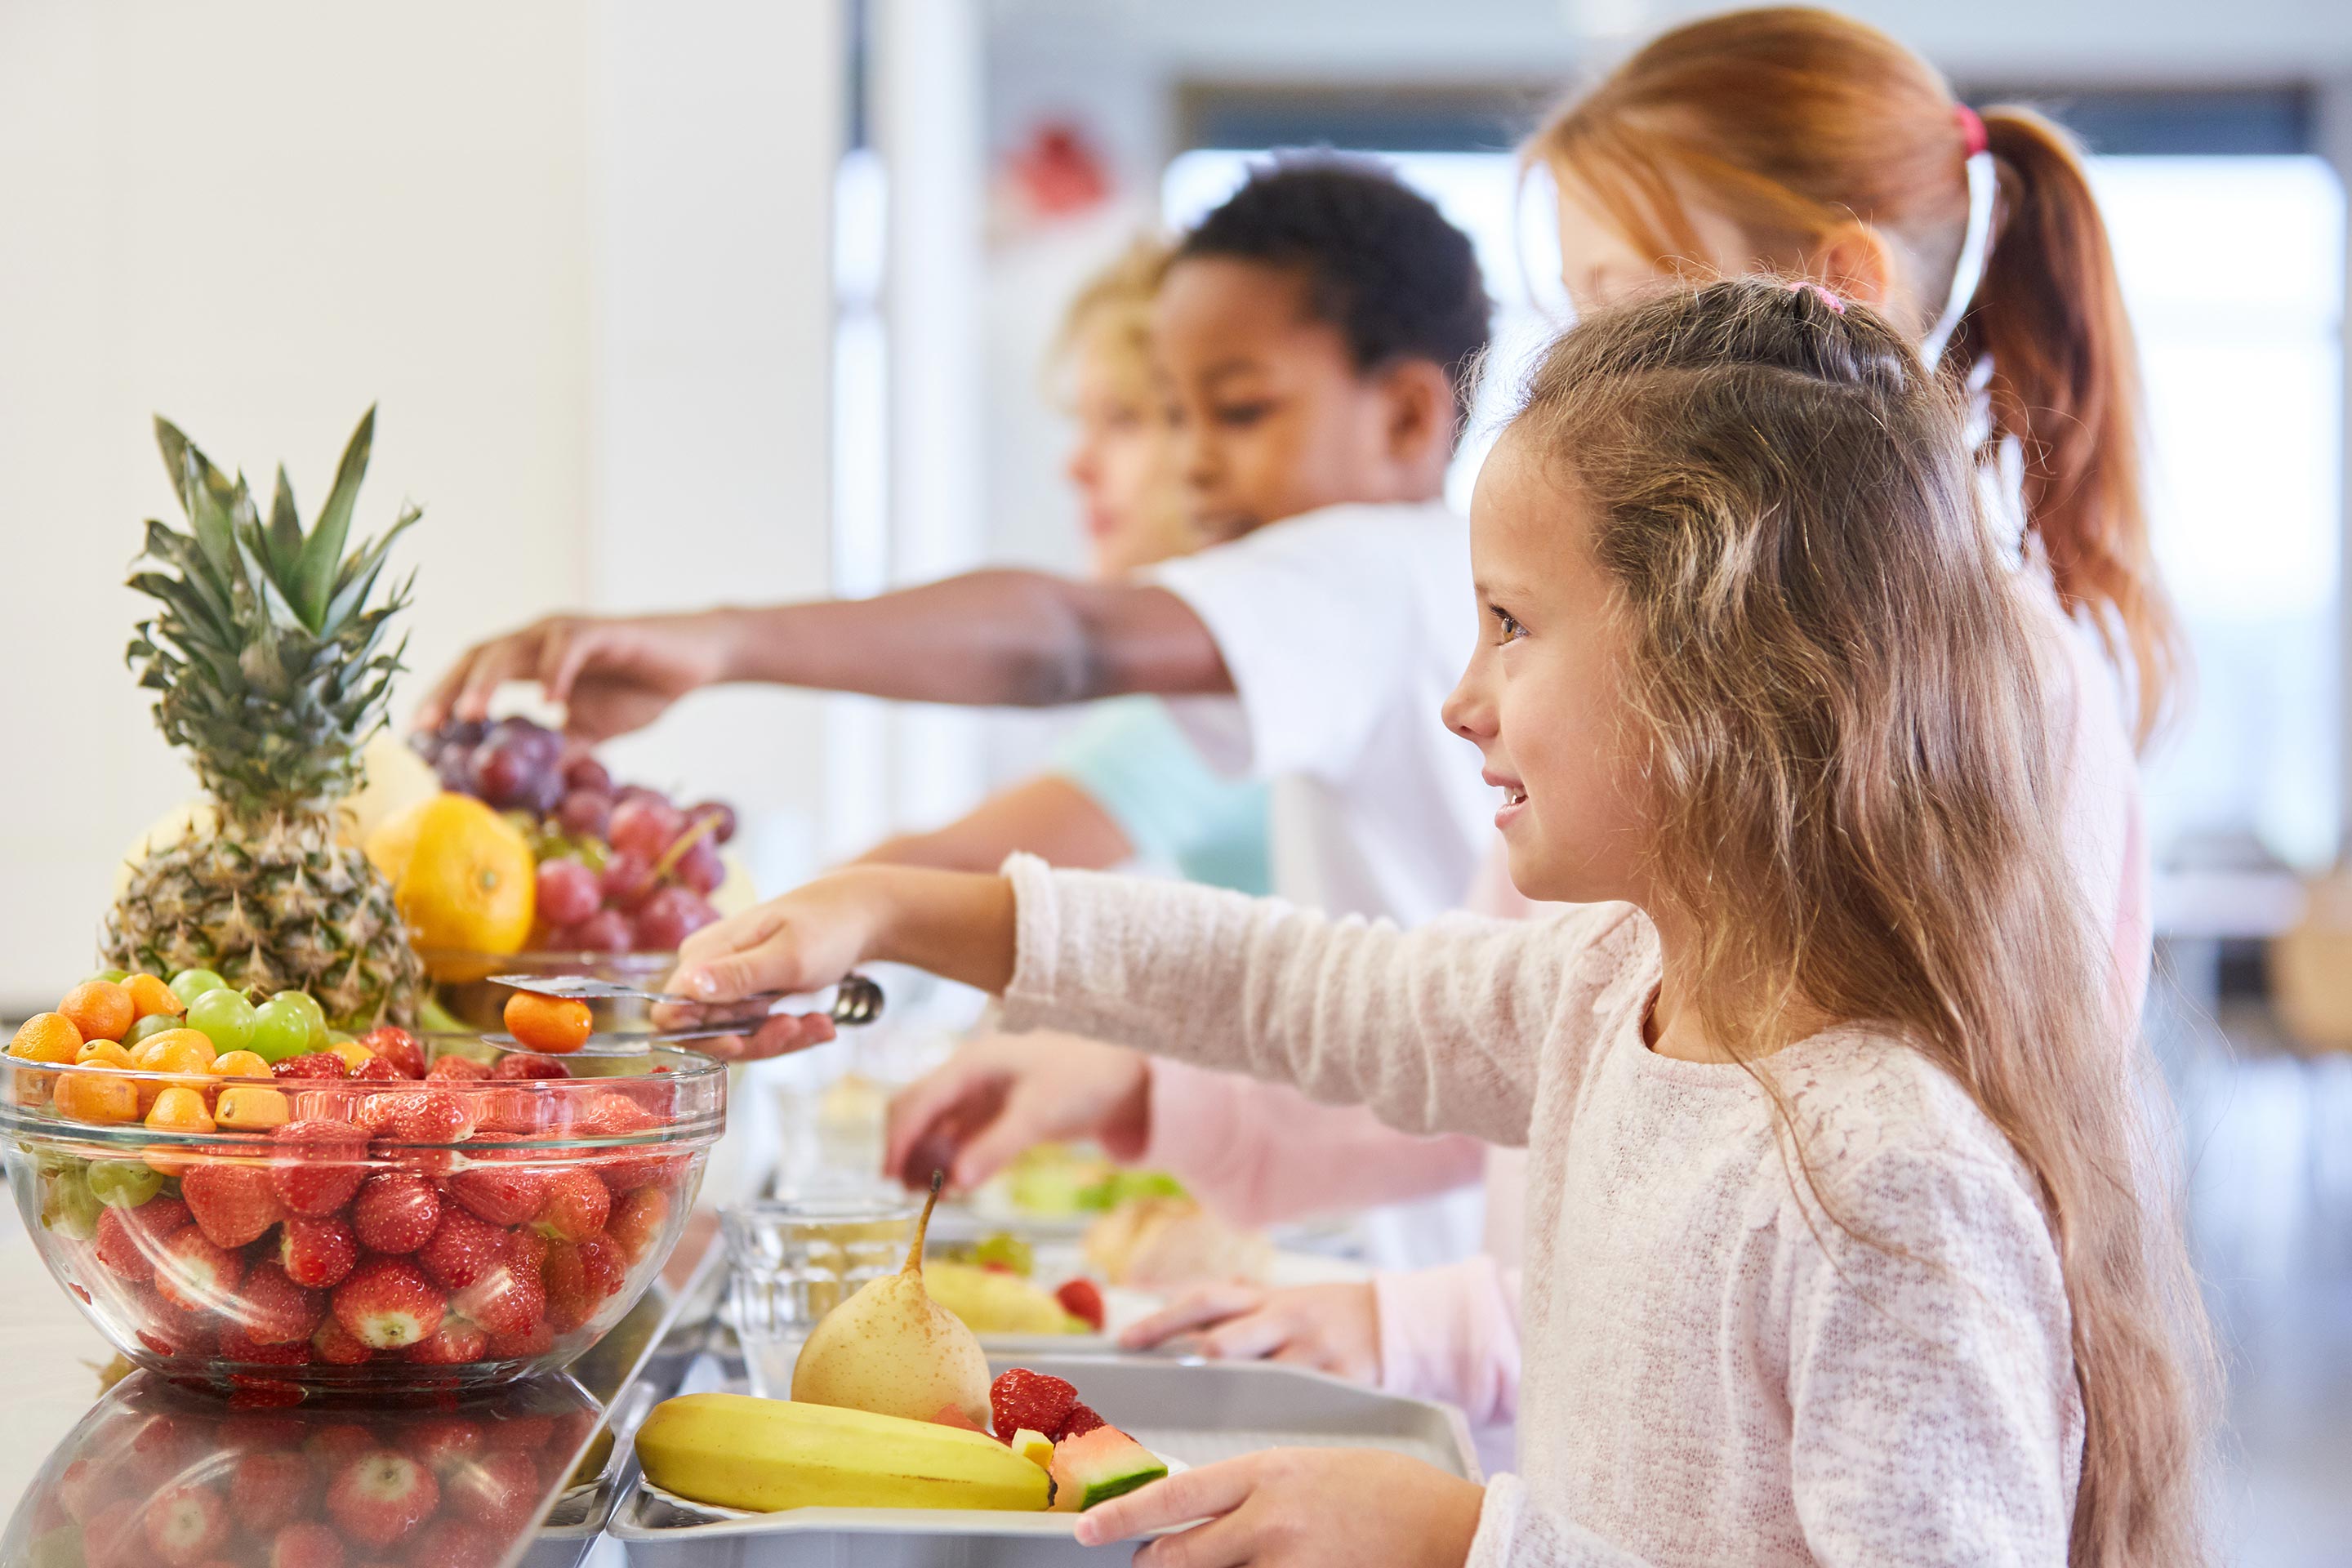 Kids Gut Health: The role of nutrition in the digestive health of children